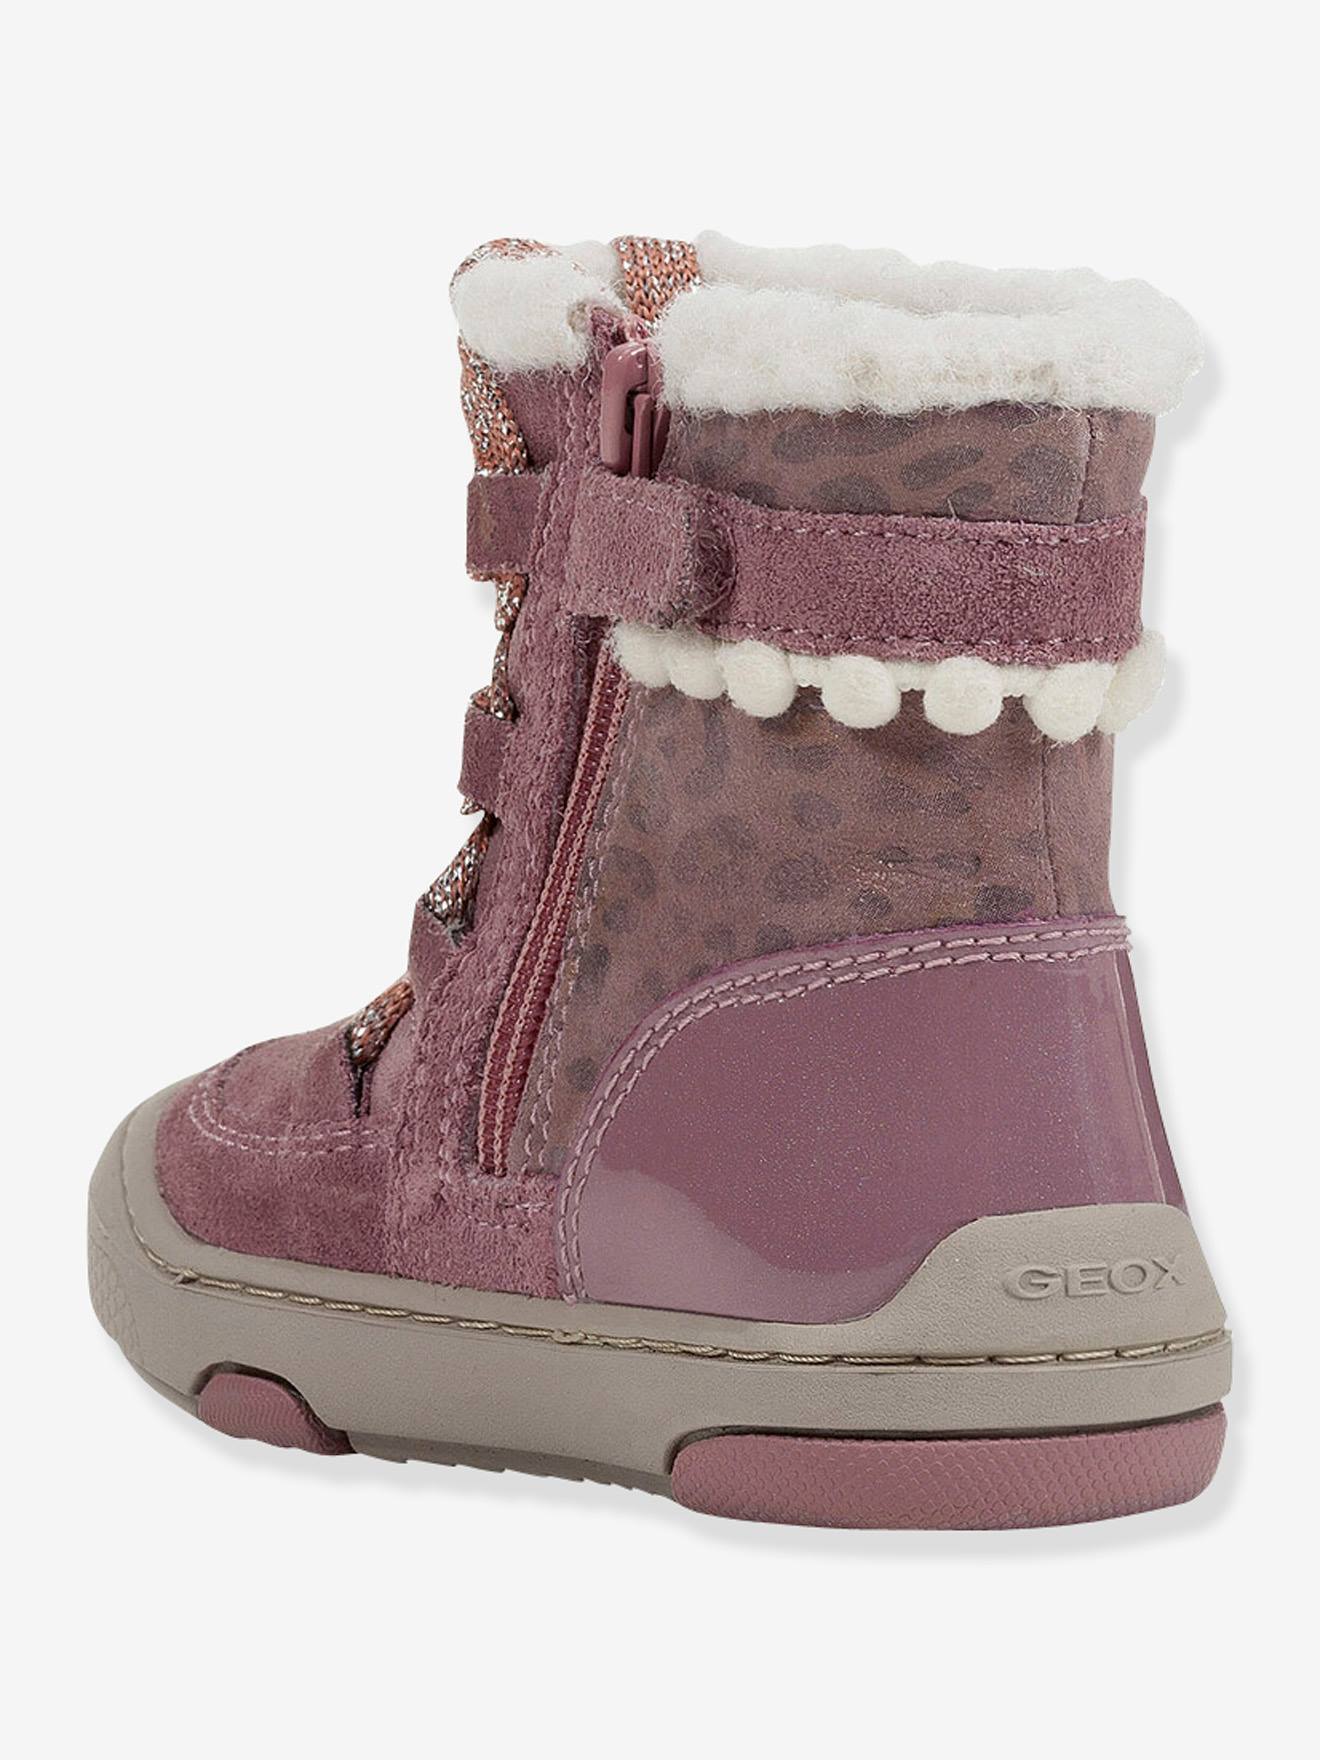 Fur-Lined Boots for Baby Girls, B Jayj 